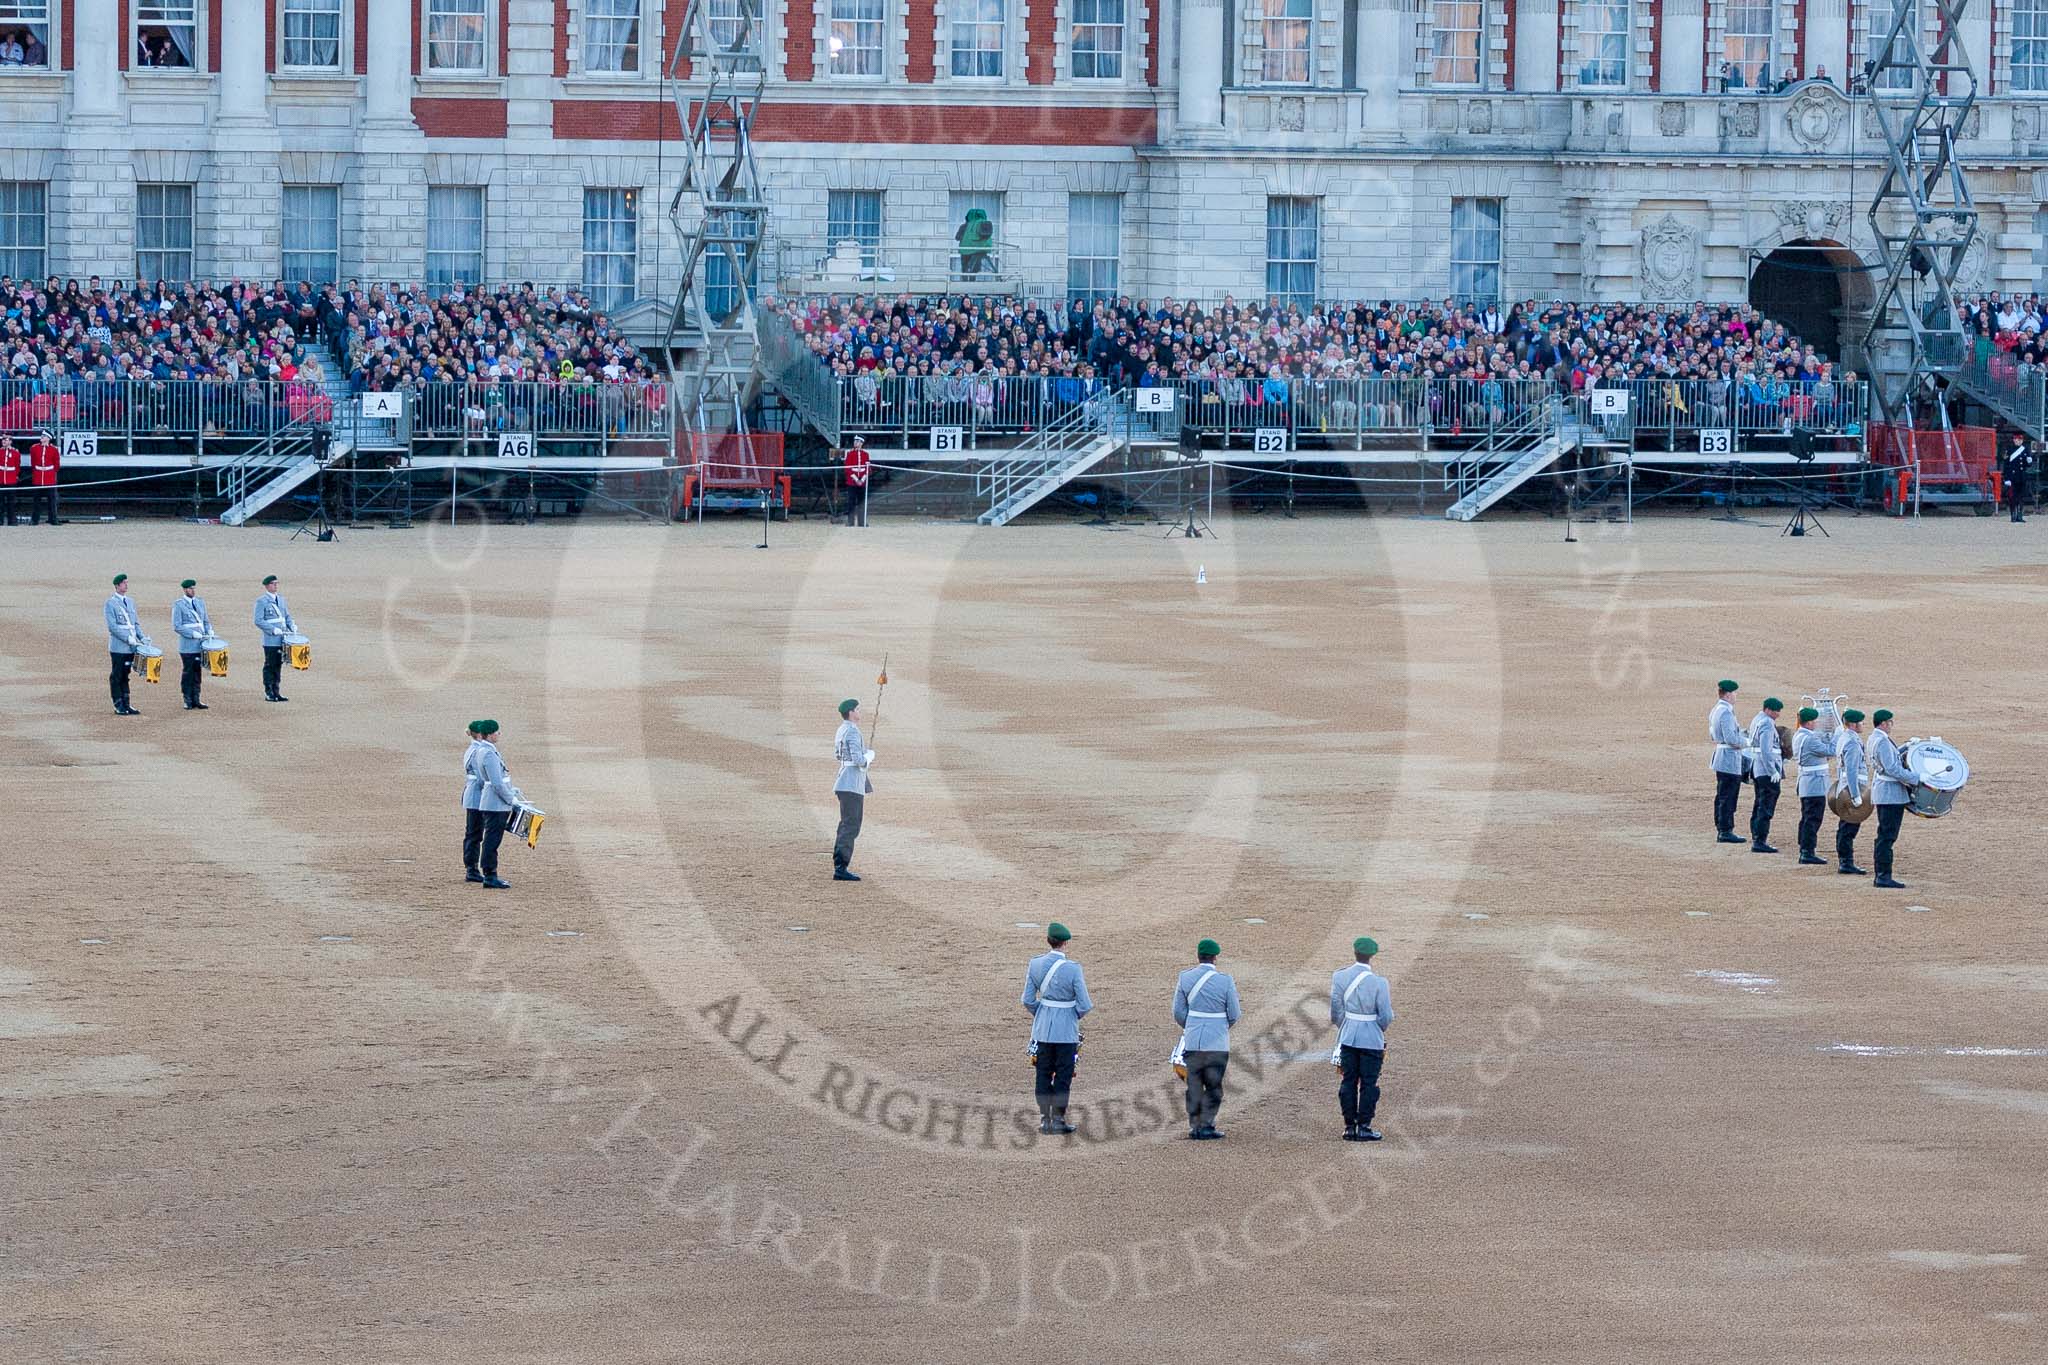 Beating Retreat 2015 - Waterloo 200.
Horse Guards Parade, Westminster,
London,

United Kingdom,
on 10 June 2015 at 20:43, image #177